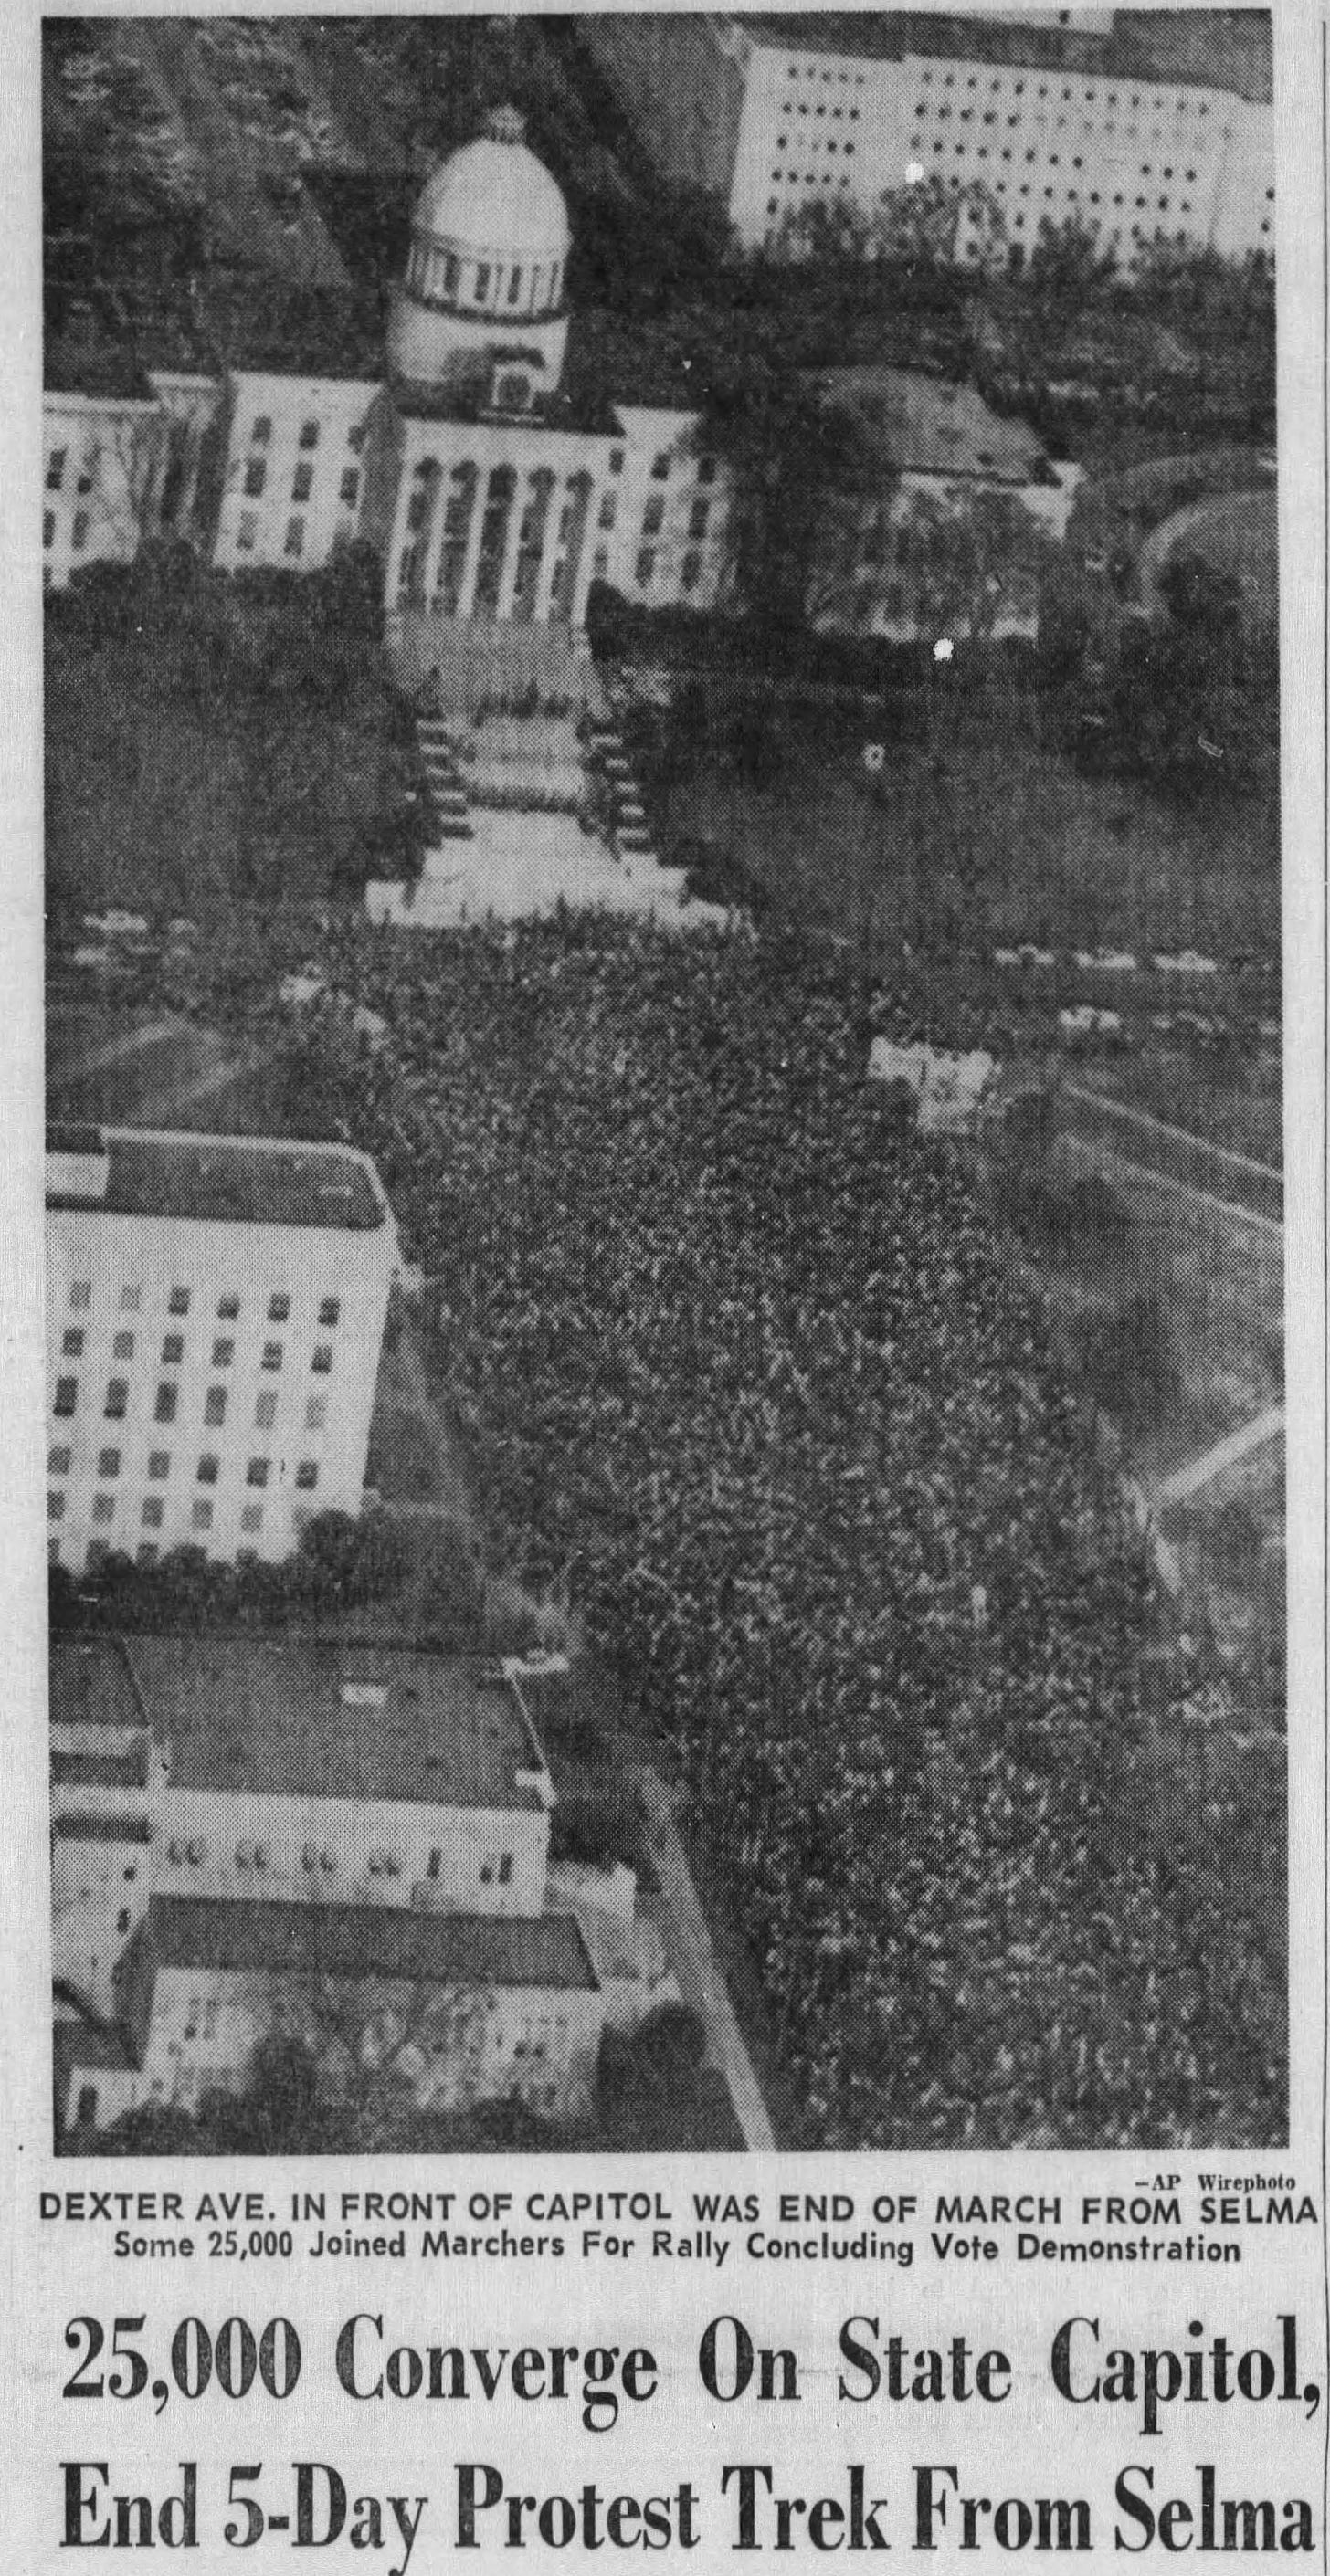 Image of marchers gathered in front of the Alabama State Capitol. Montgomery Advertiser. Friday, March 26, 1956